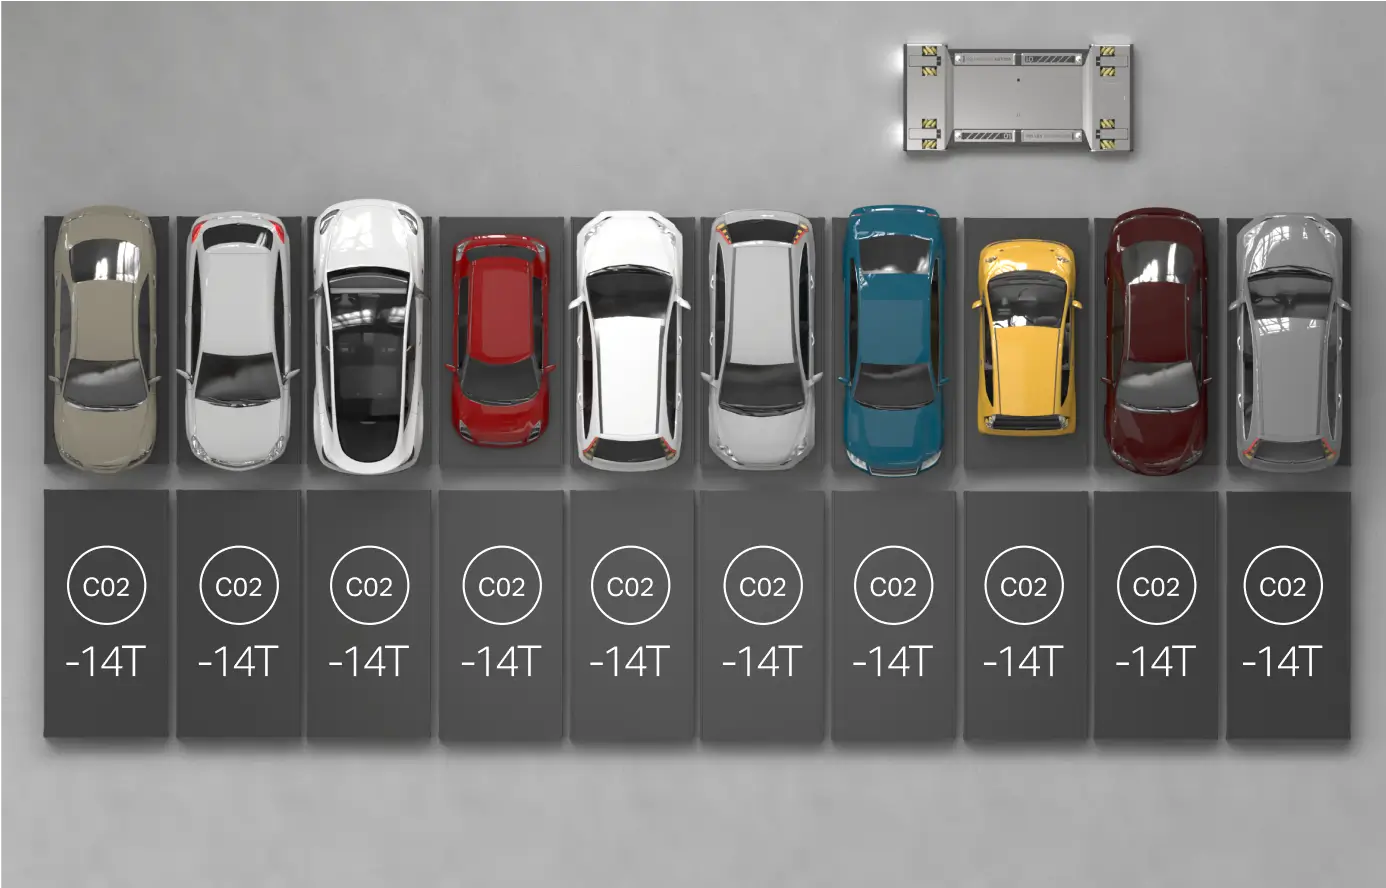 Top-down view of a row of ten parked cars in various colors, each in a marked parking slot with CO2 emission labels indicating "-14T" on a grey surface.